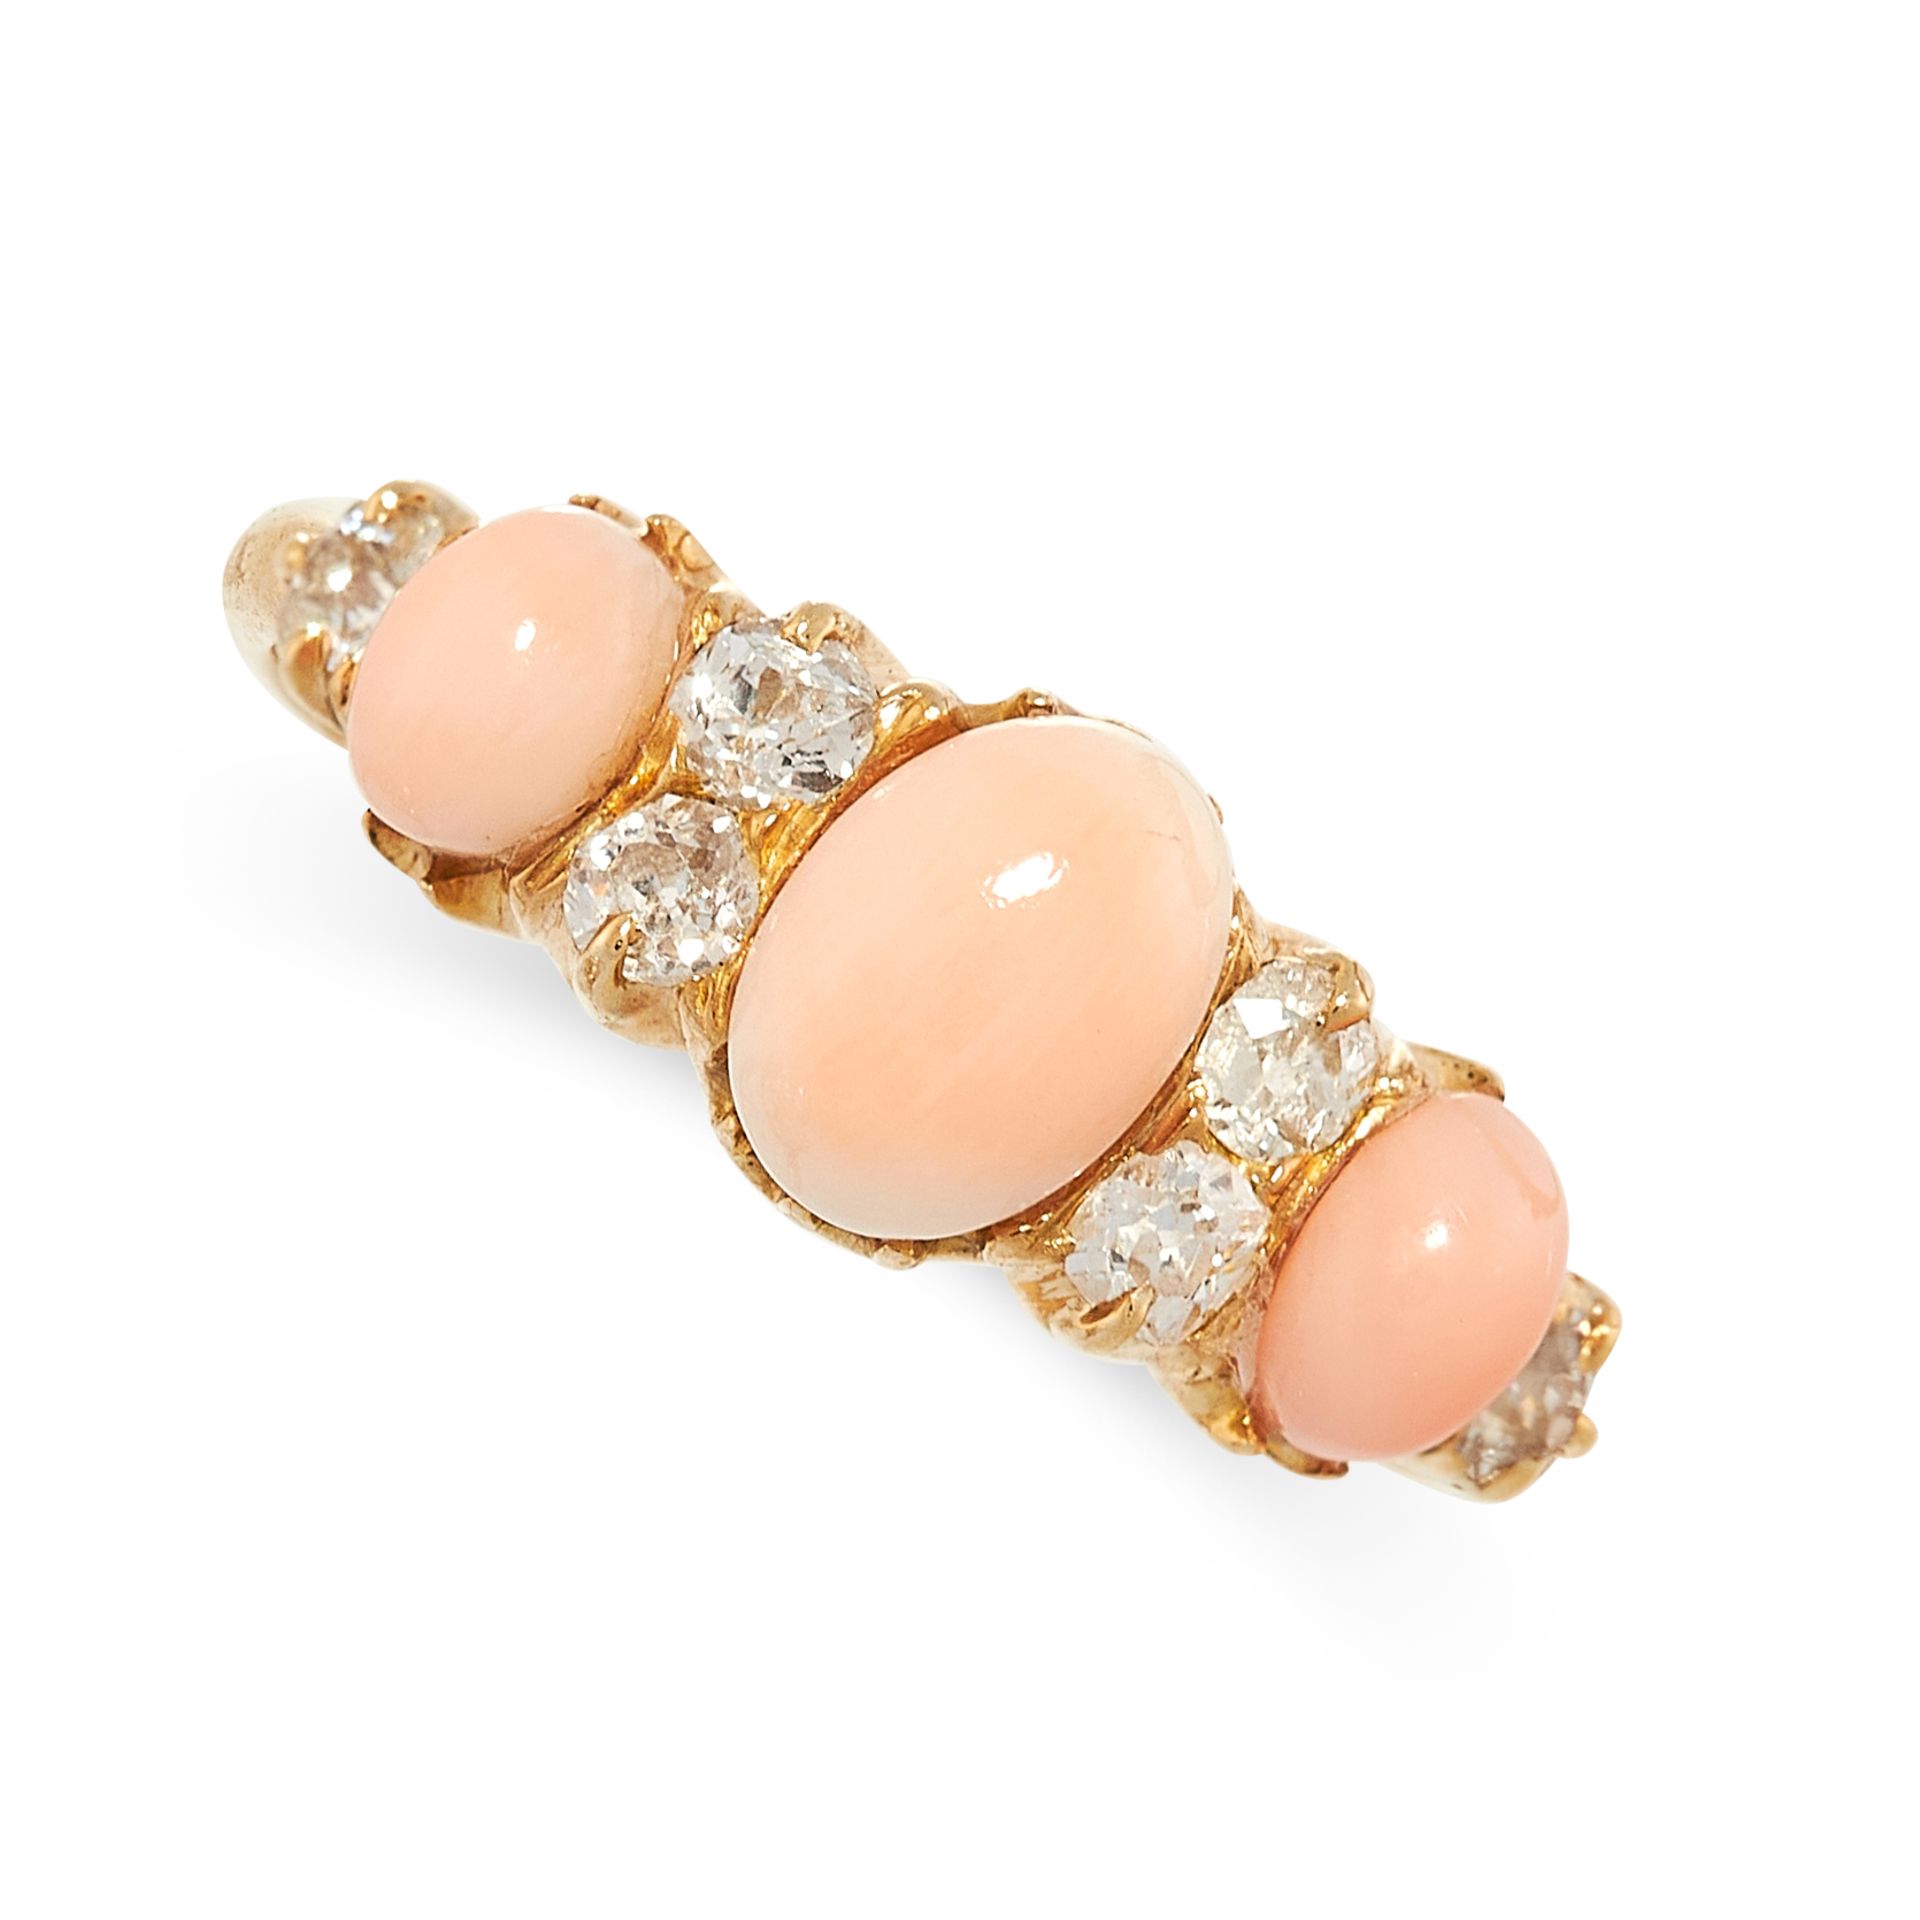 A CORAL AND DIAMOND RING in yellow gold, set with three graduated polished coral beads, accented